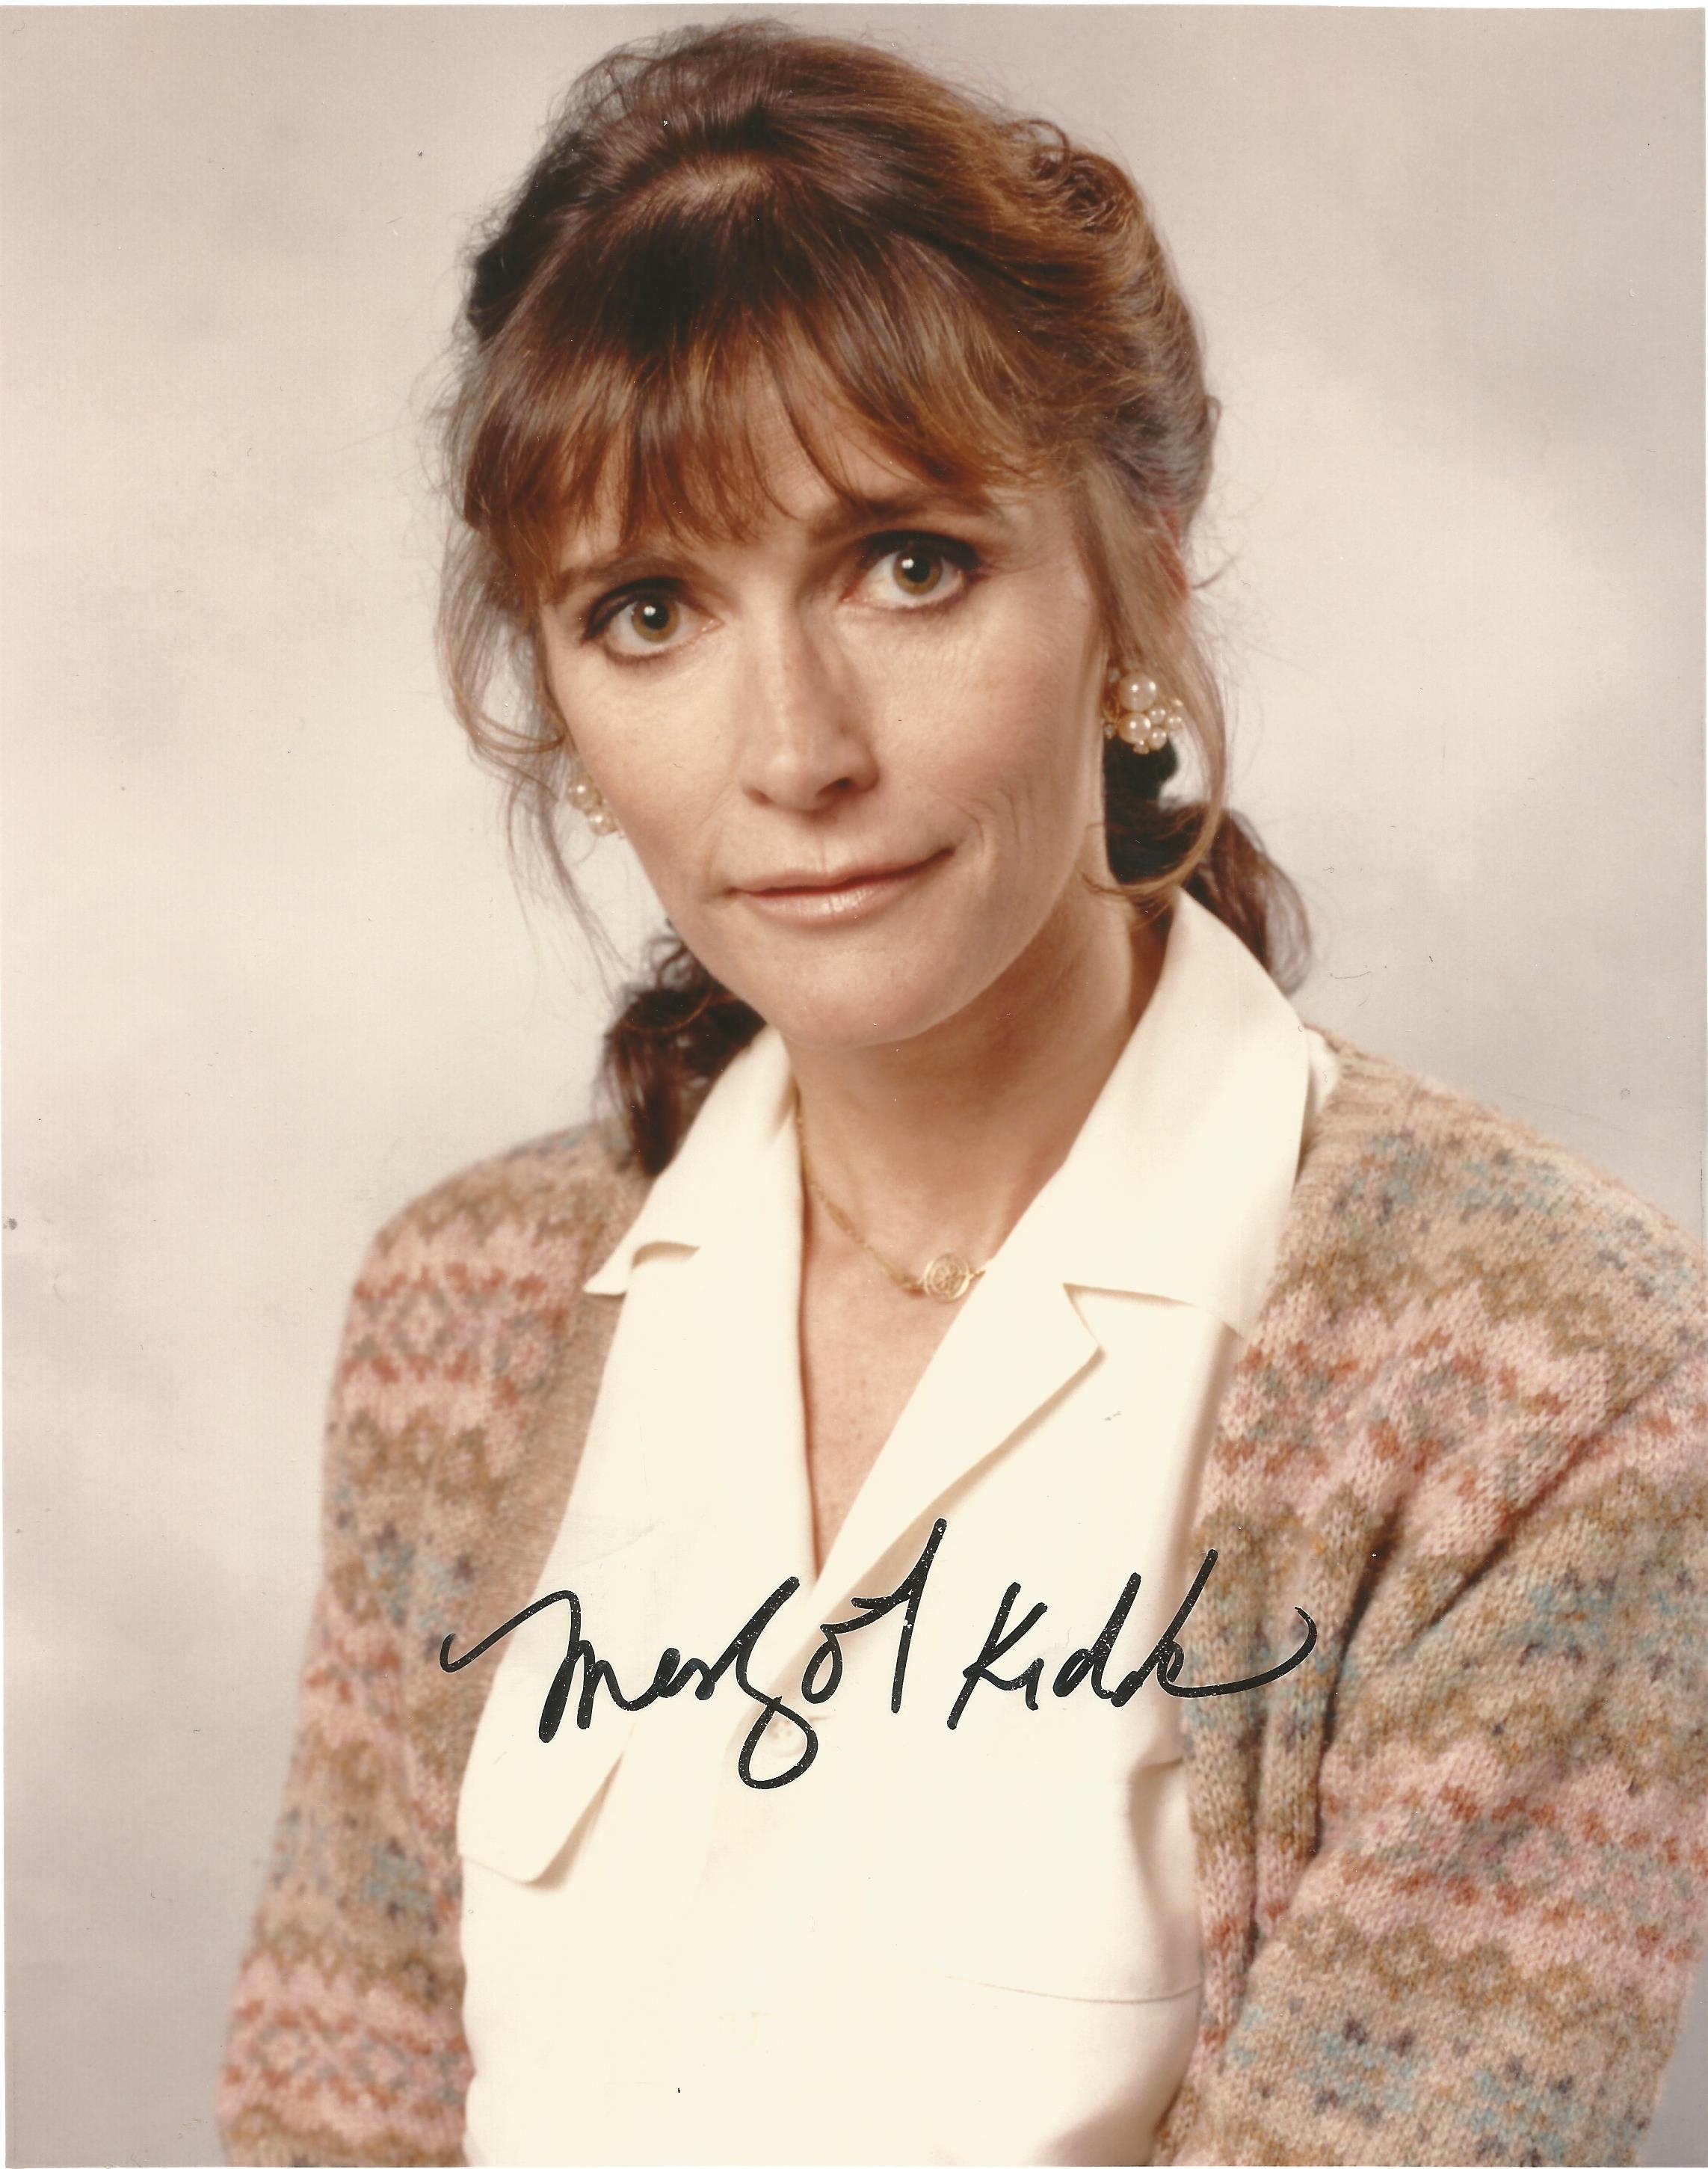 Margot Kidder signed 10x8 colour photo. (October 17, 1948 - May 13, 2018),, was a Canadian-